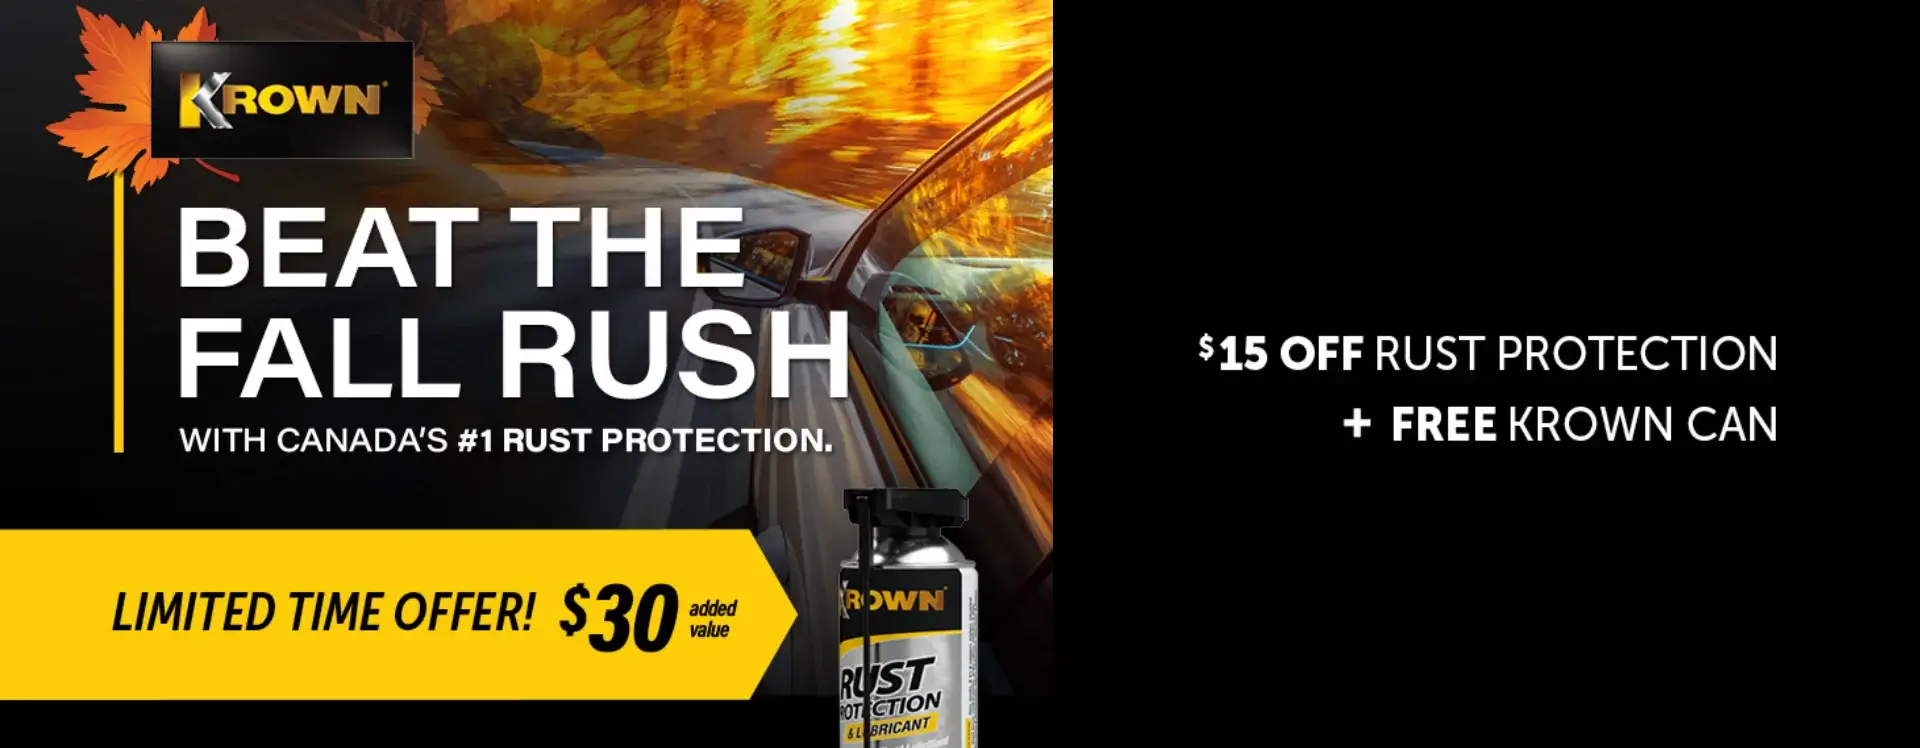 GPT
Ad for rust protection discount